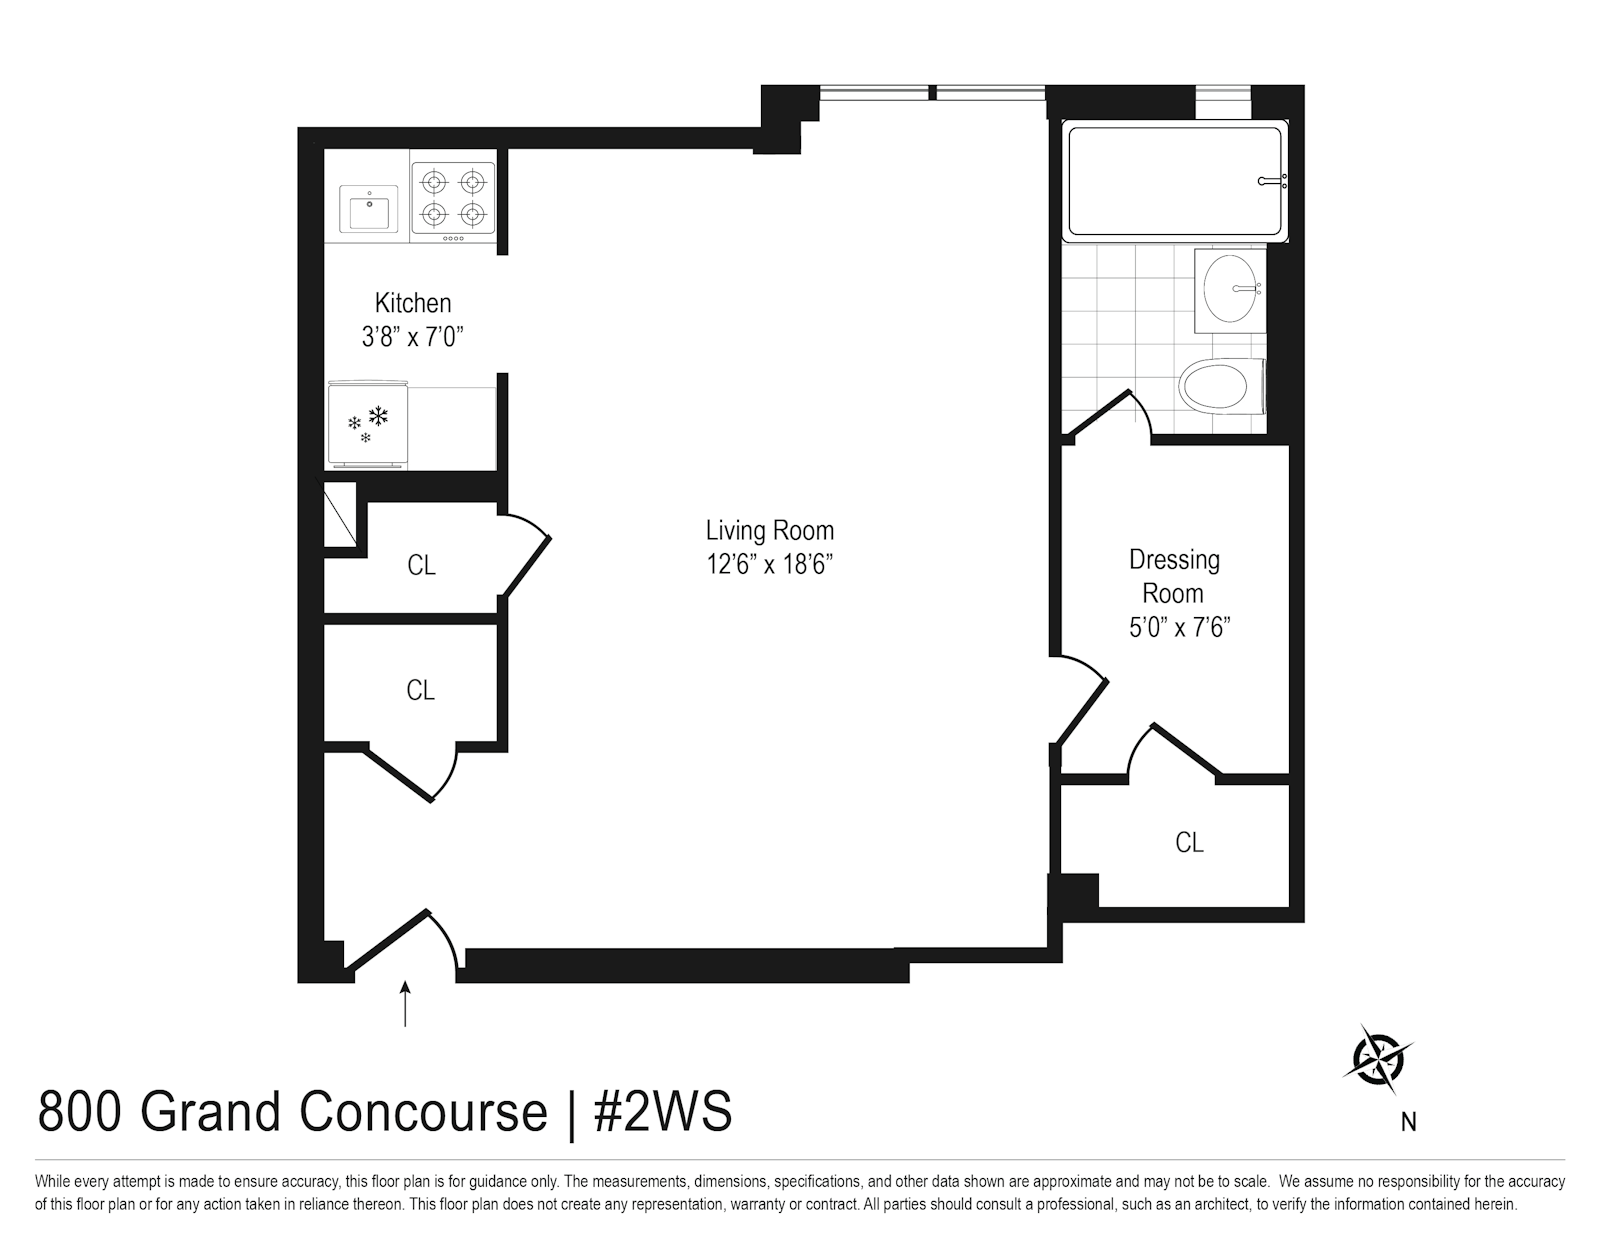 Floorplan for 800 Grand Concourse, 2WS